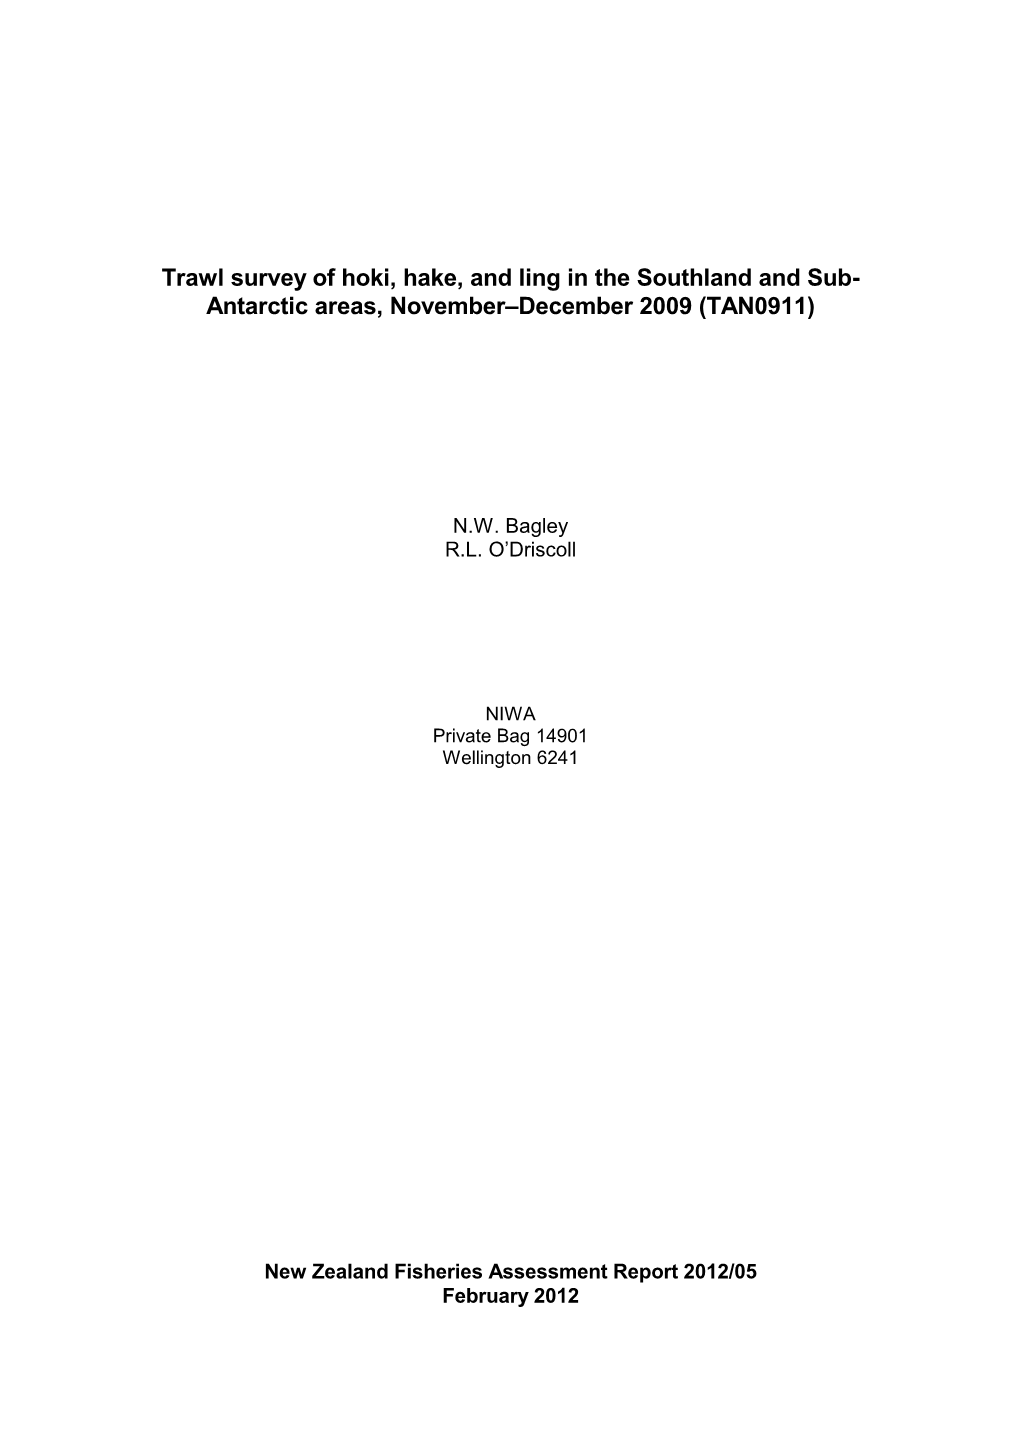 (2012) Trawl Survey of Middle Depth Species in Southland and Sub